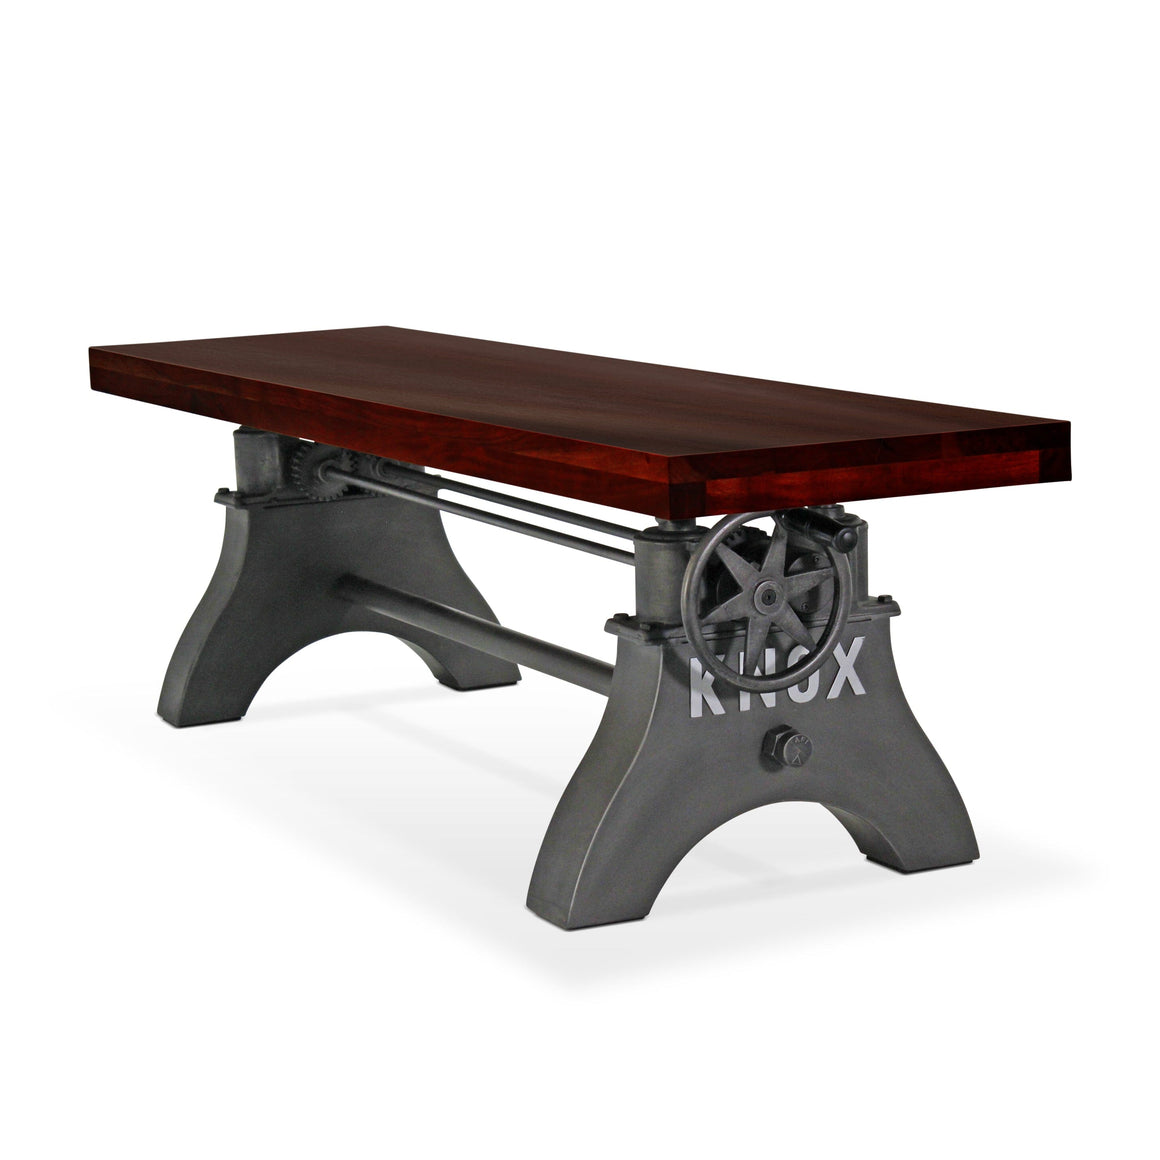 KNOX Adjustable Bench Dining to Bar Height - Industrial Iron Crank - Mahogany Top Bench Rustic Deco